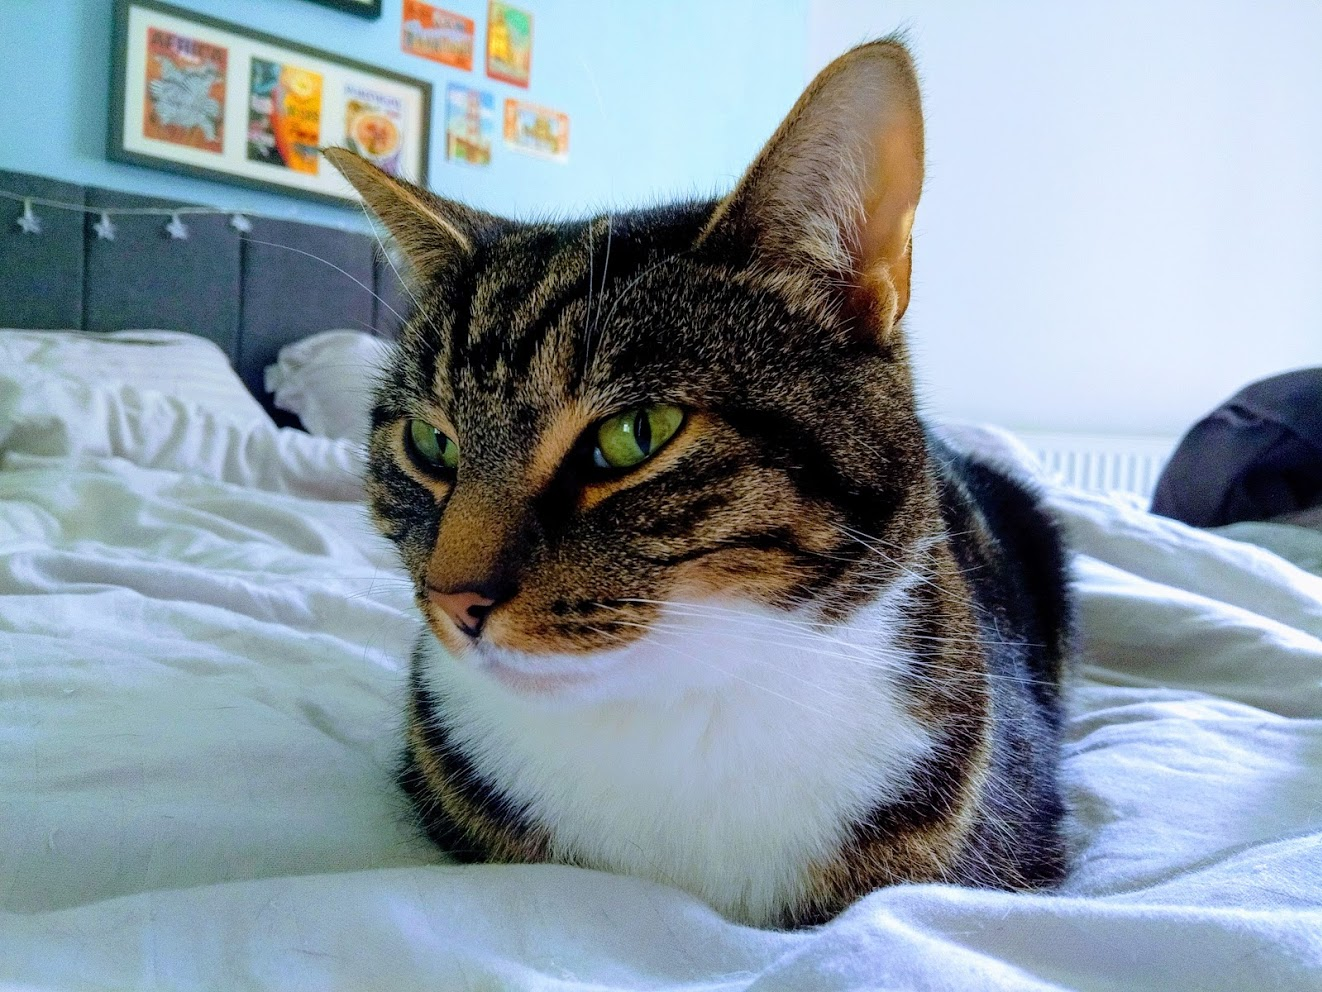 A tabby and white cat with green eyes sitting on a bed